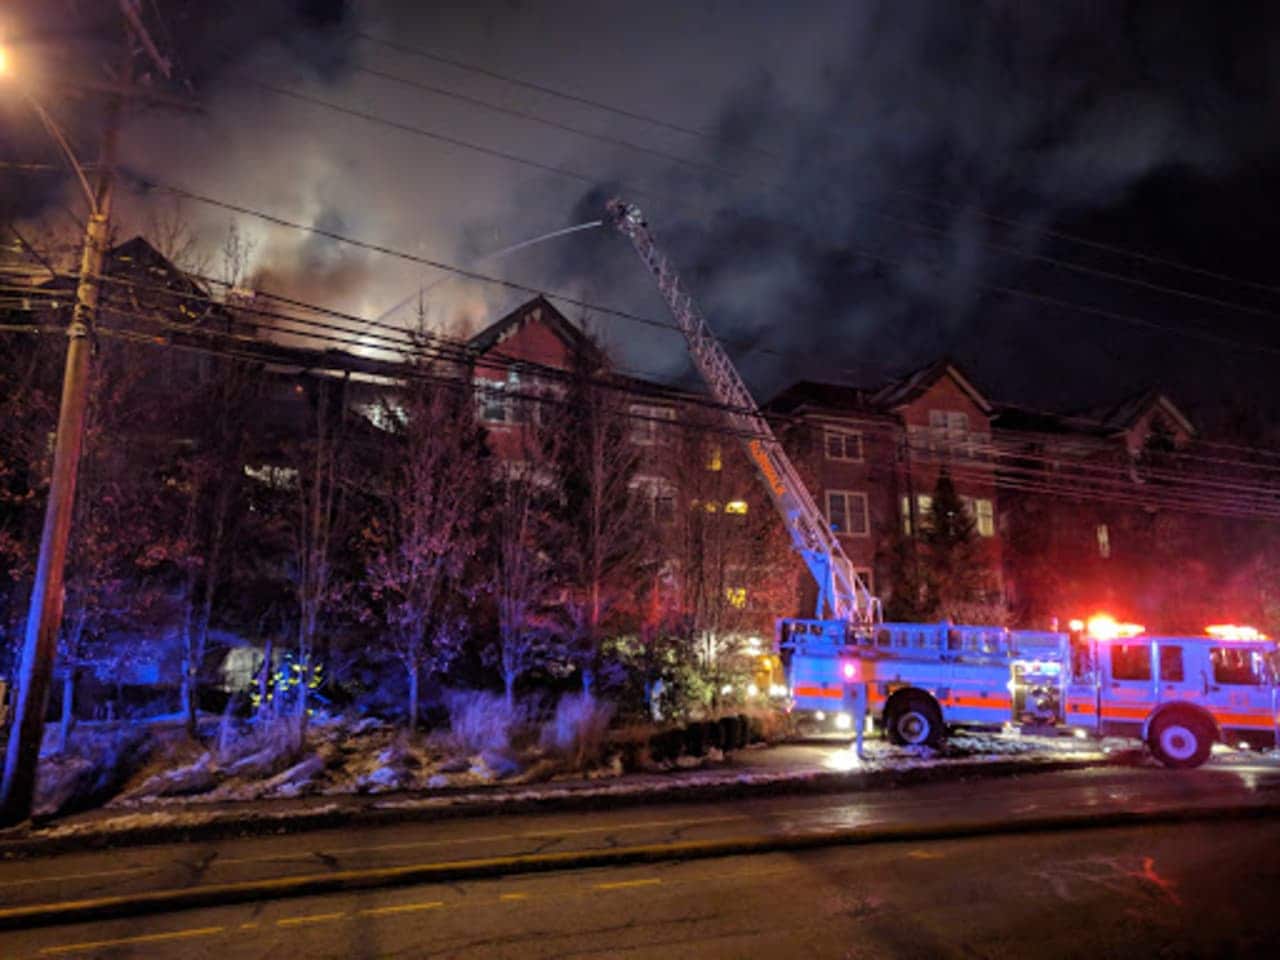 Fire crews attack the blaze from above in the condo building on Richards Avenue in Norwalk on Monday evening.